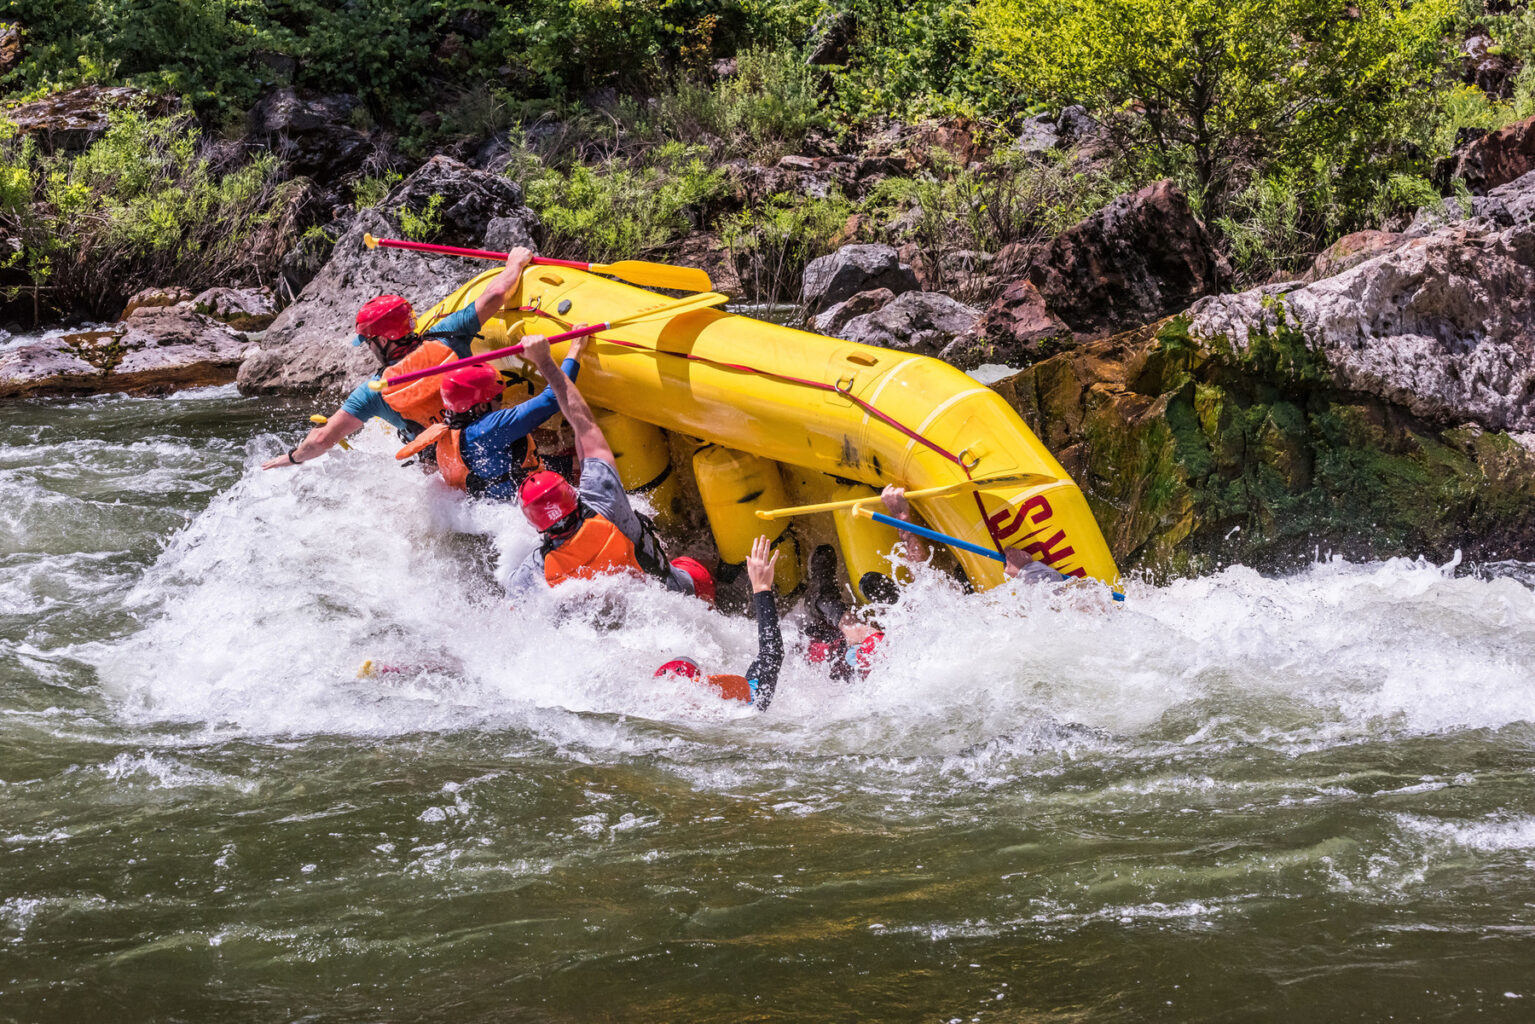 A yellow raft in mid-flip on the Tuolumne River trip in California as guests fall into the river